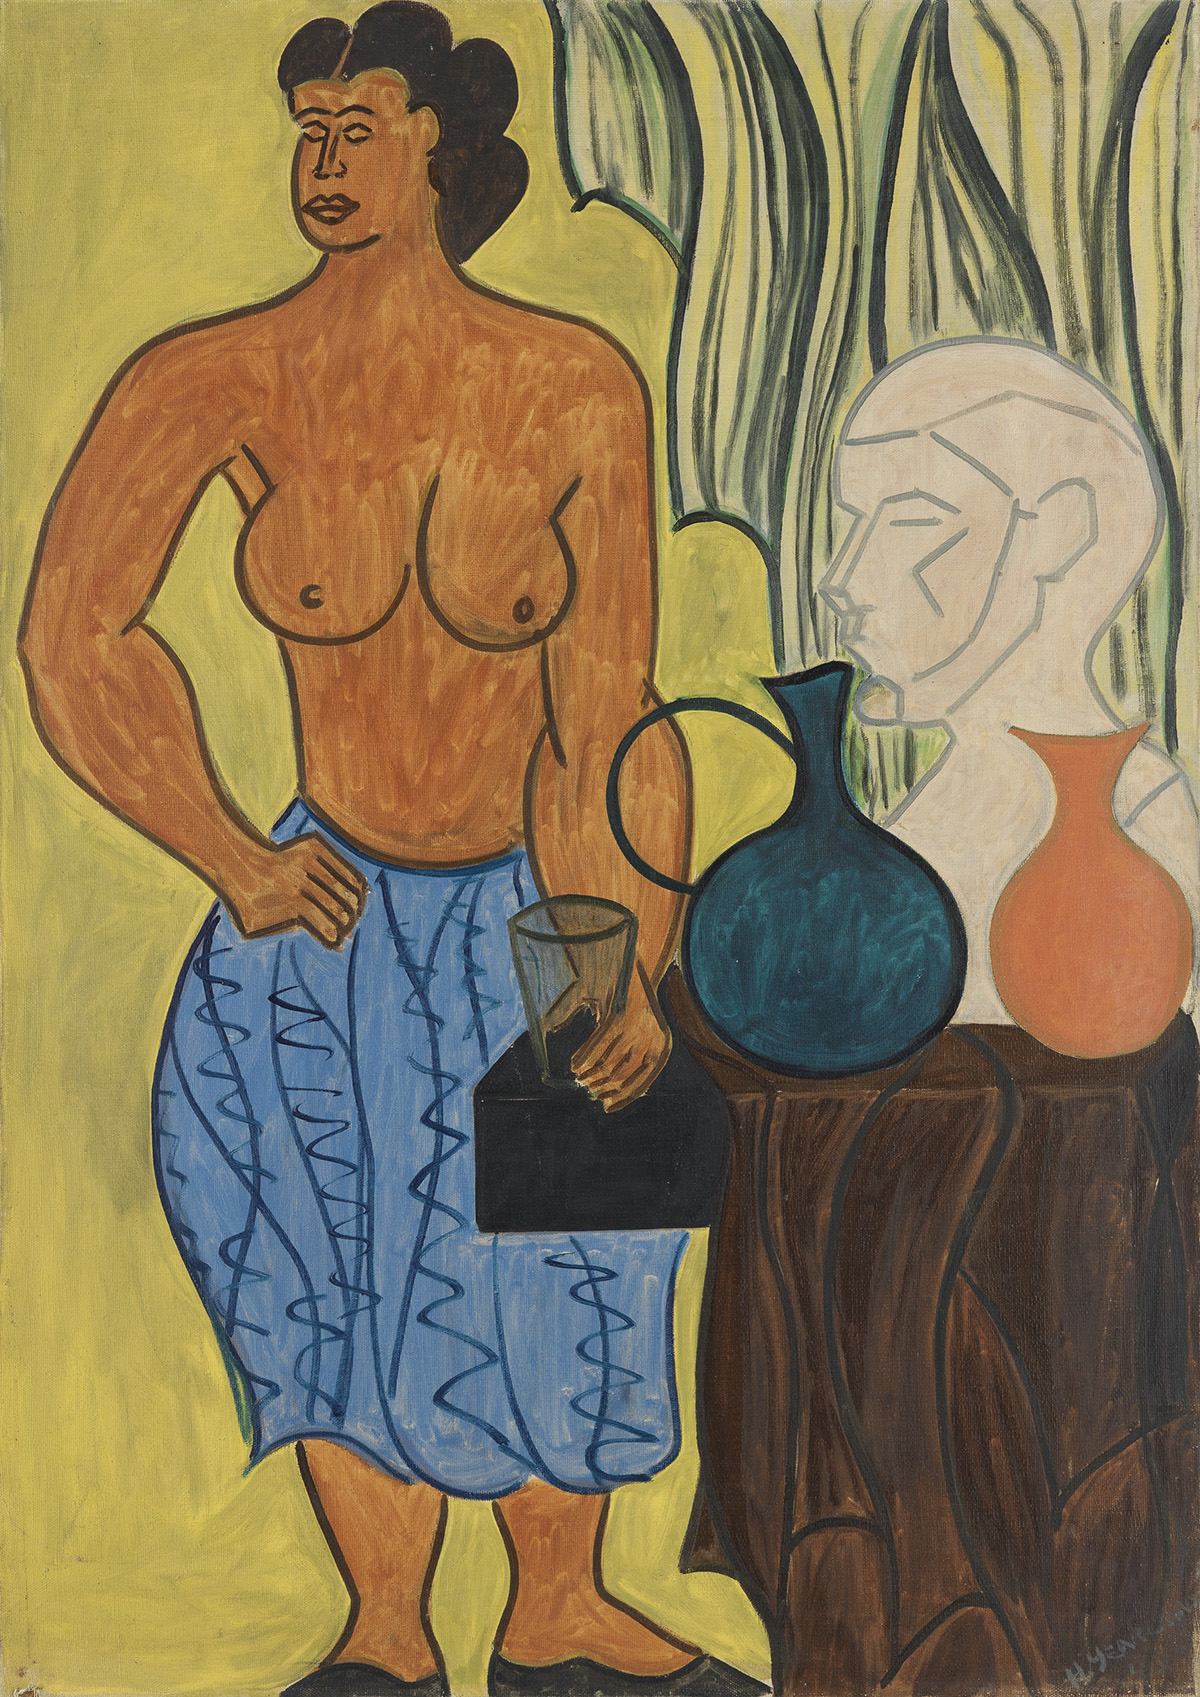 HARTWELL YEARGANS (1915 - 2005) Untitled (Nude with Sculpture and Vases).